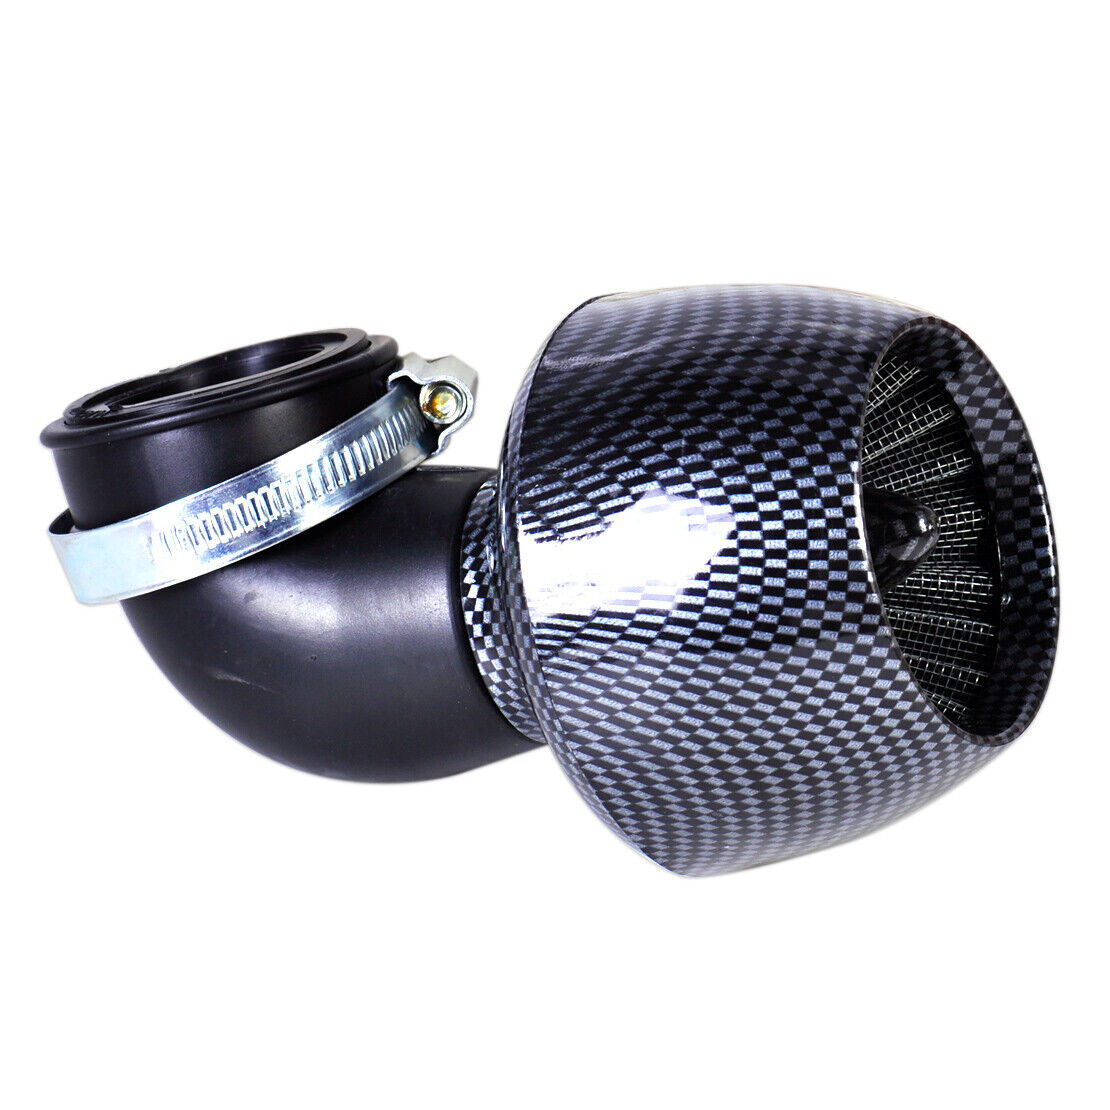 35/42/48mm Air Filter fit for 150cc & 250cc Scooter Moped Dirt Bikes ATV Quad tp